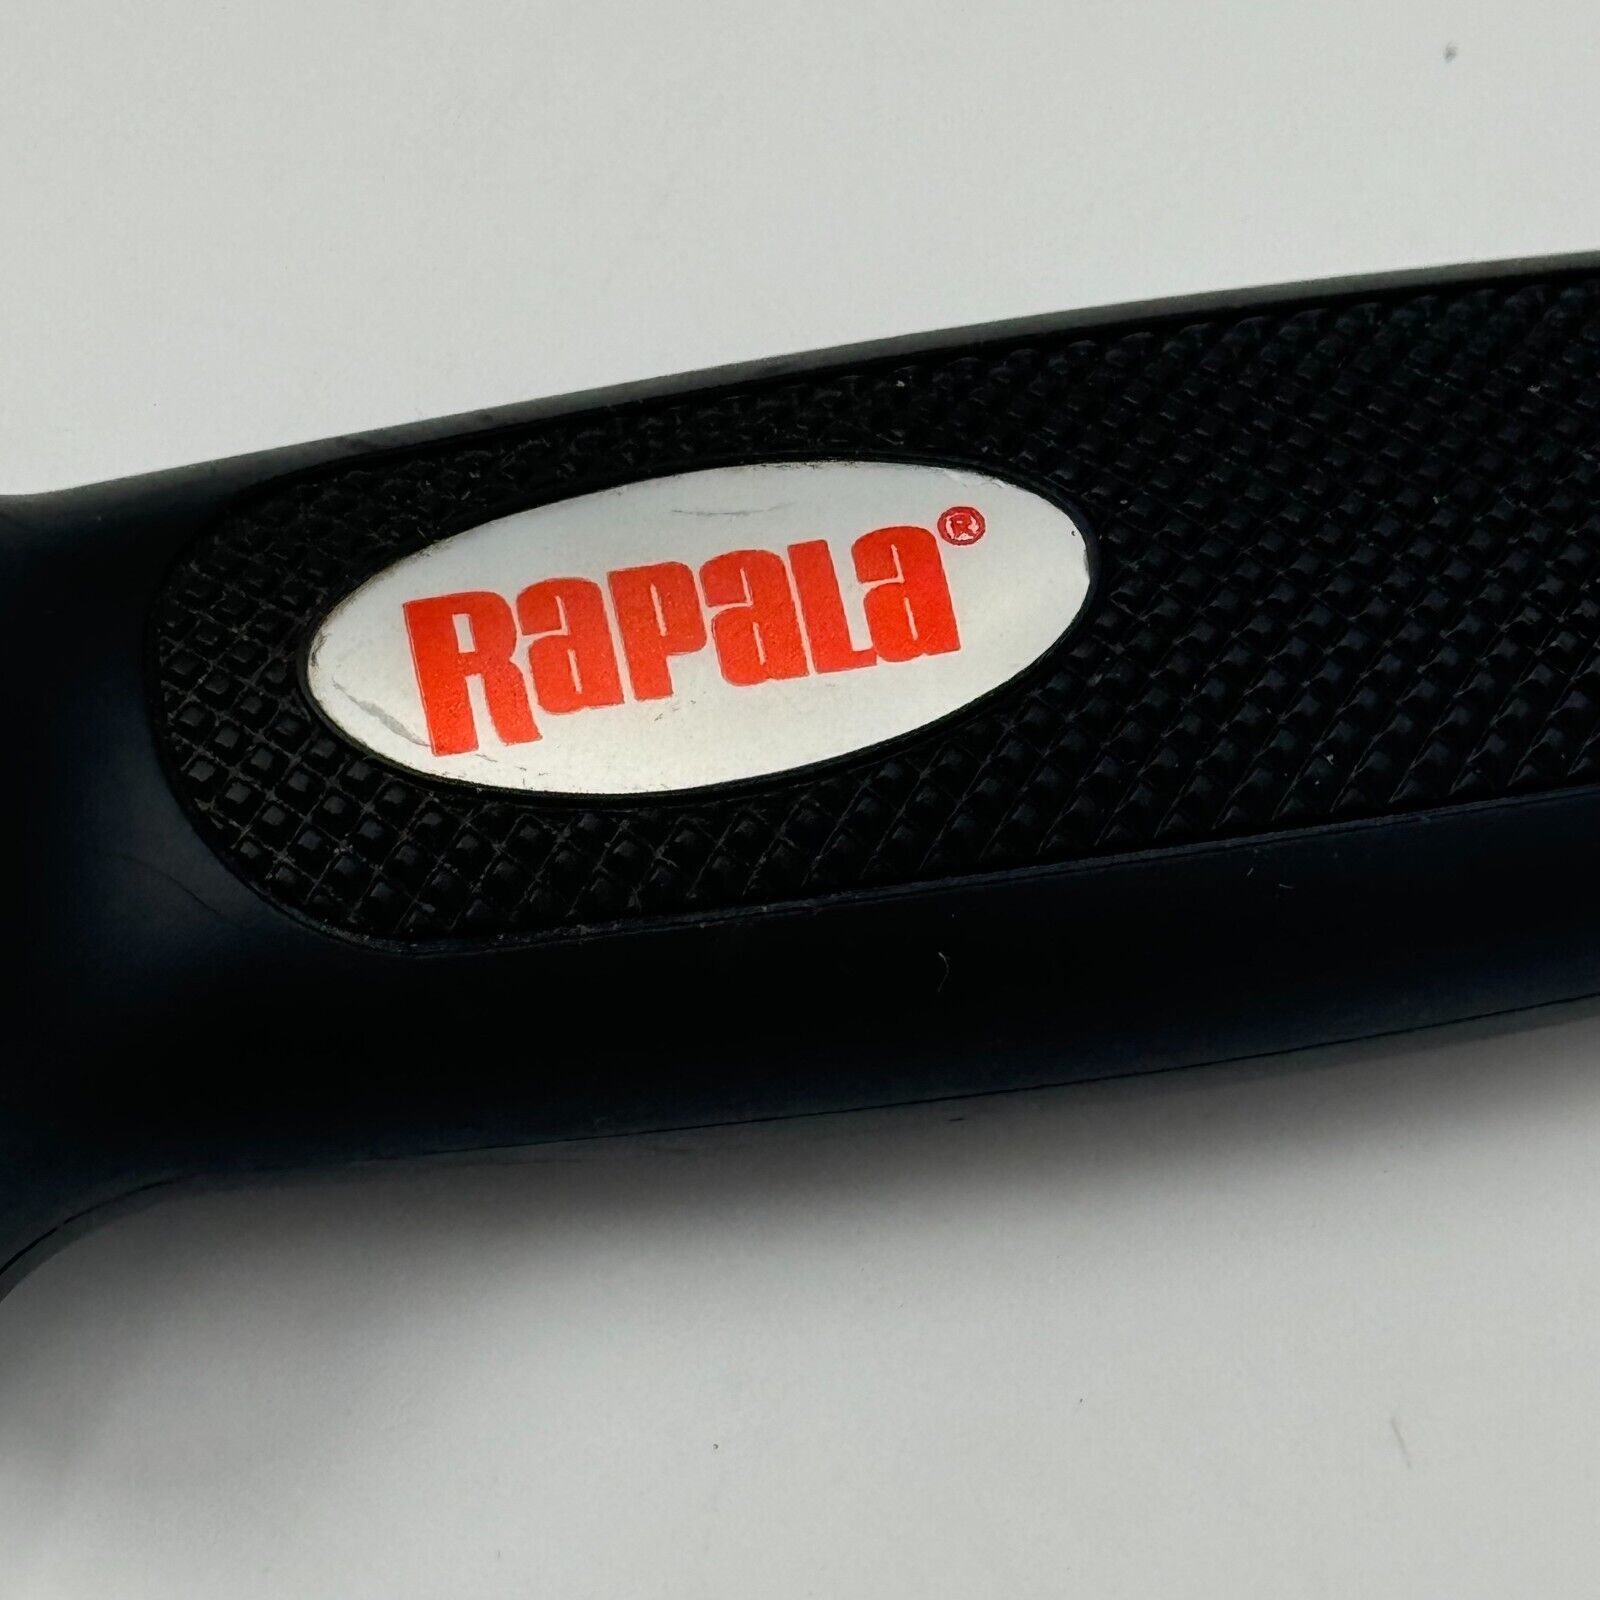 Rapala 6" Soft Grip Fillet Knife With Single Stage Sharpener And Sheath NOS